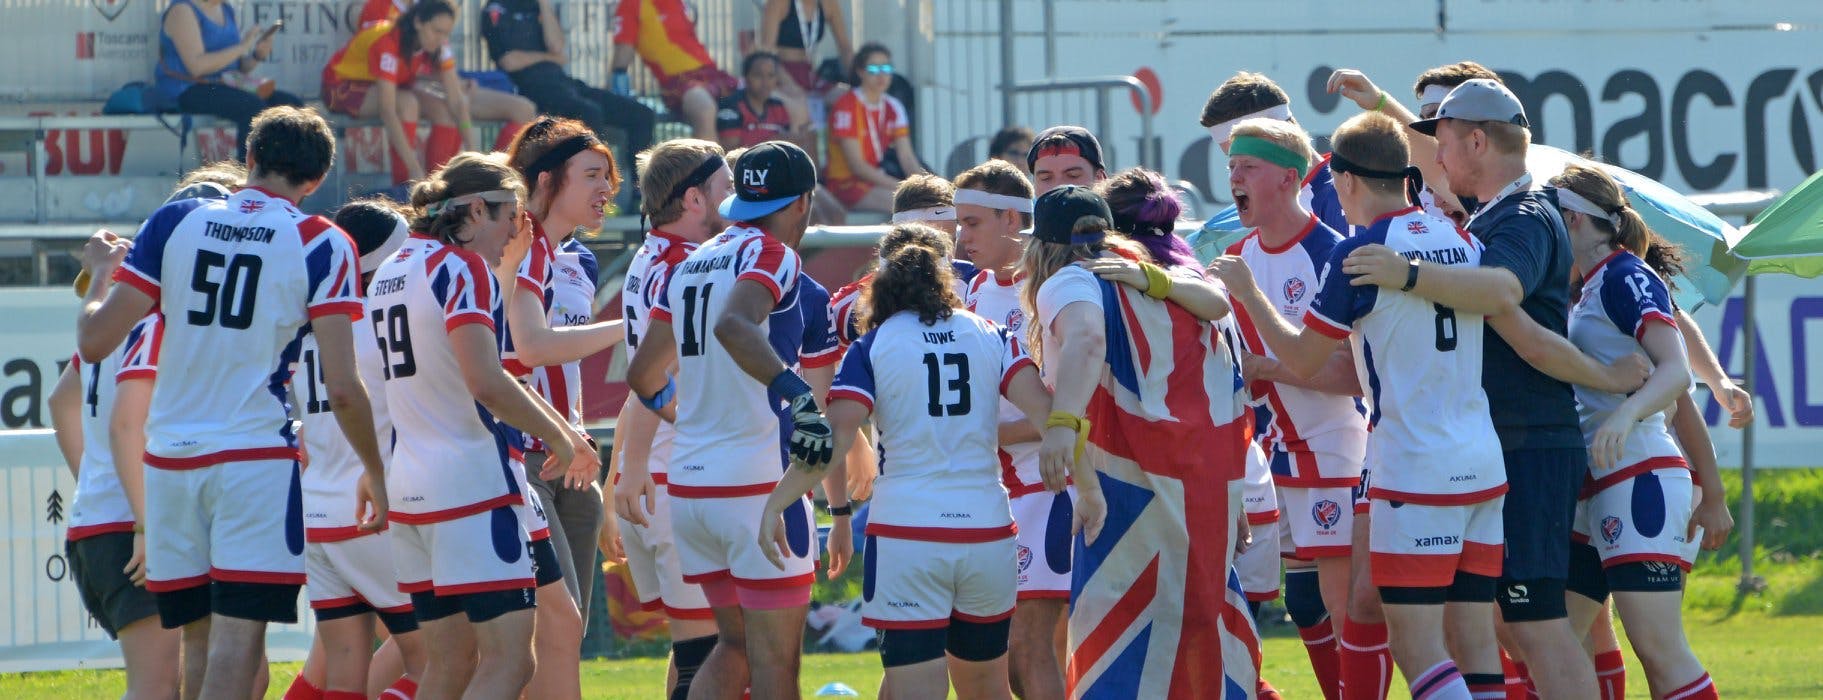 Team UK huddle before a match with their captain Seb Waters speaking at the center